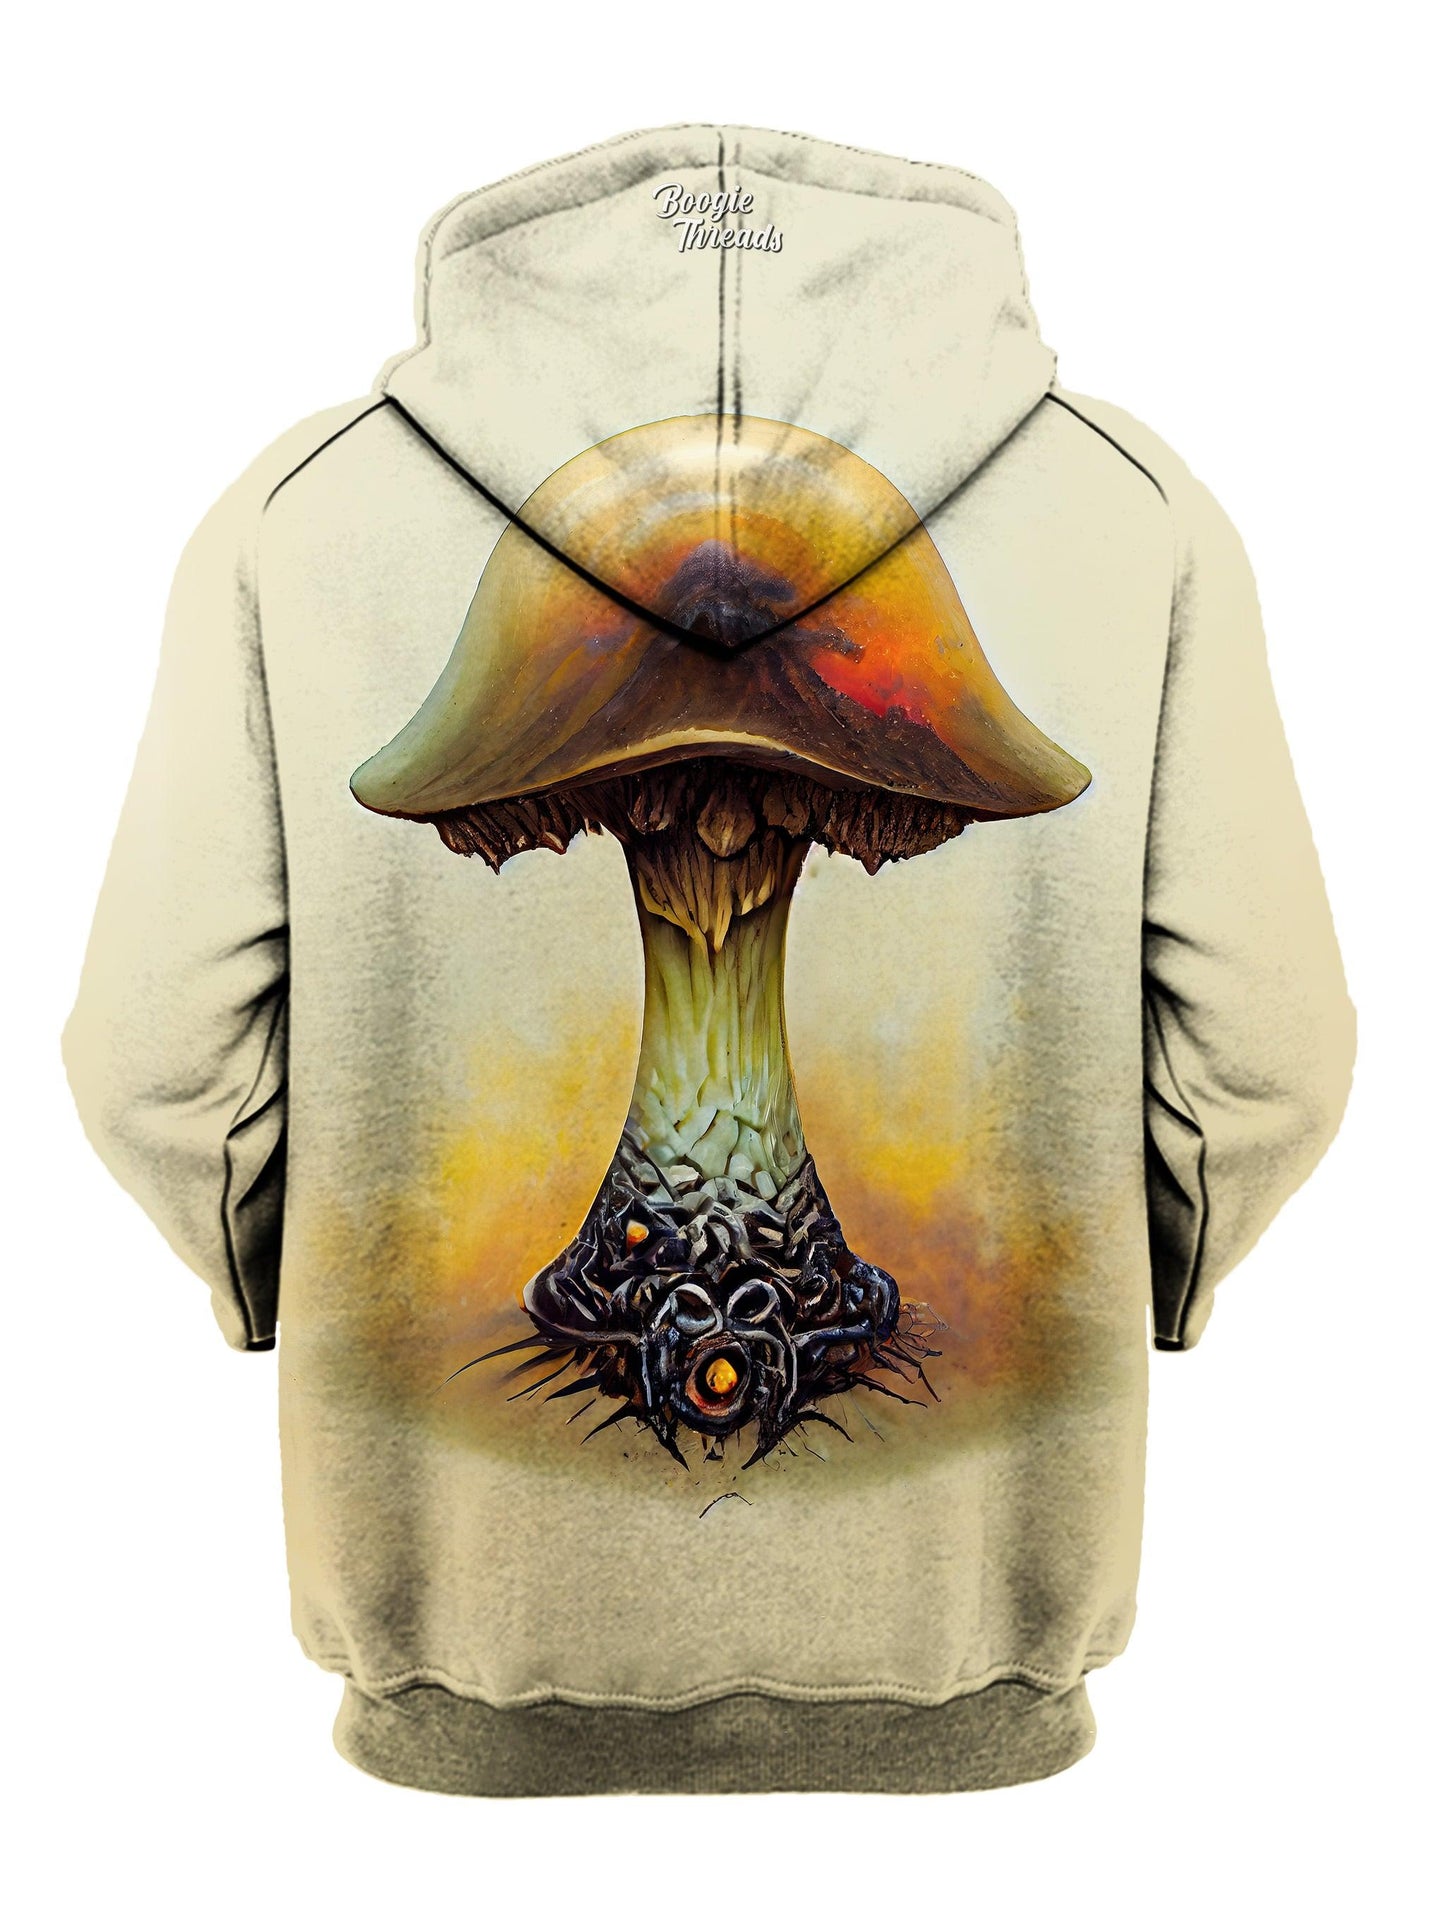 Omen Of Empathy Unisex Pullover Hoodie - EDM Festival Clothing - Boogie Threads